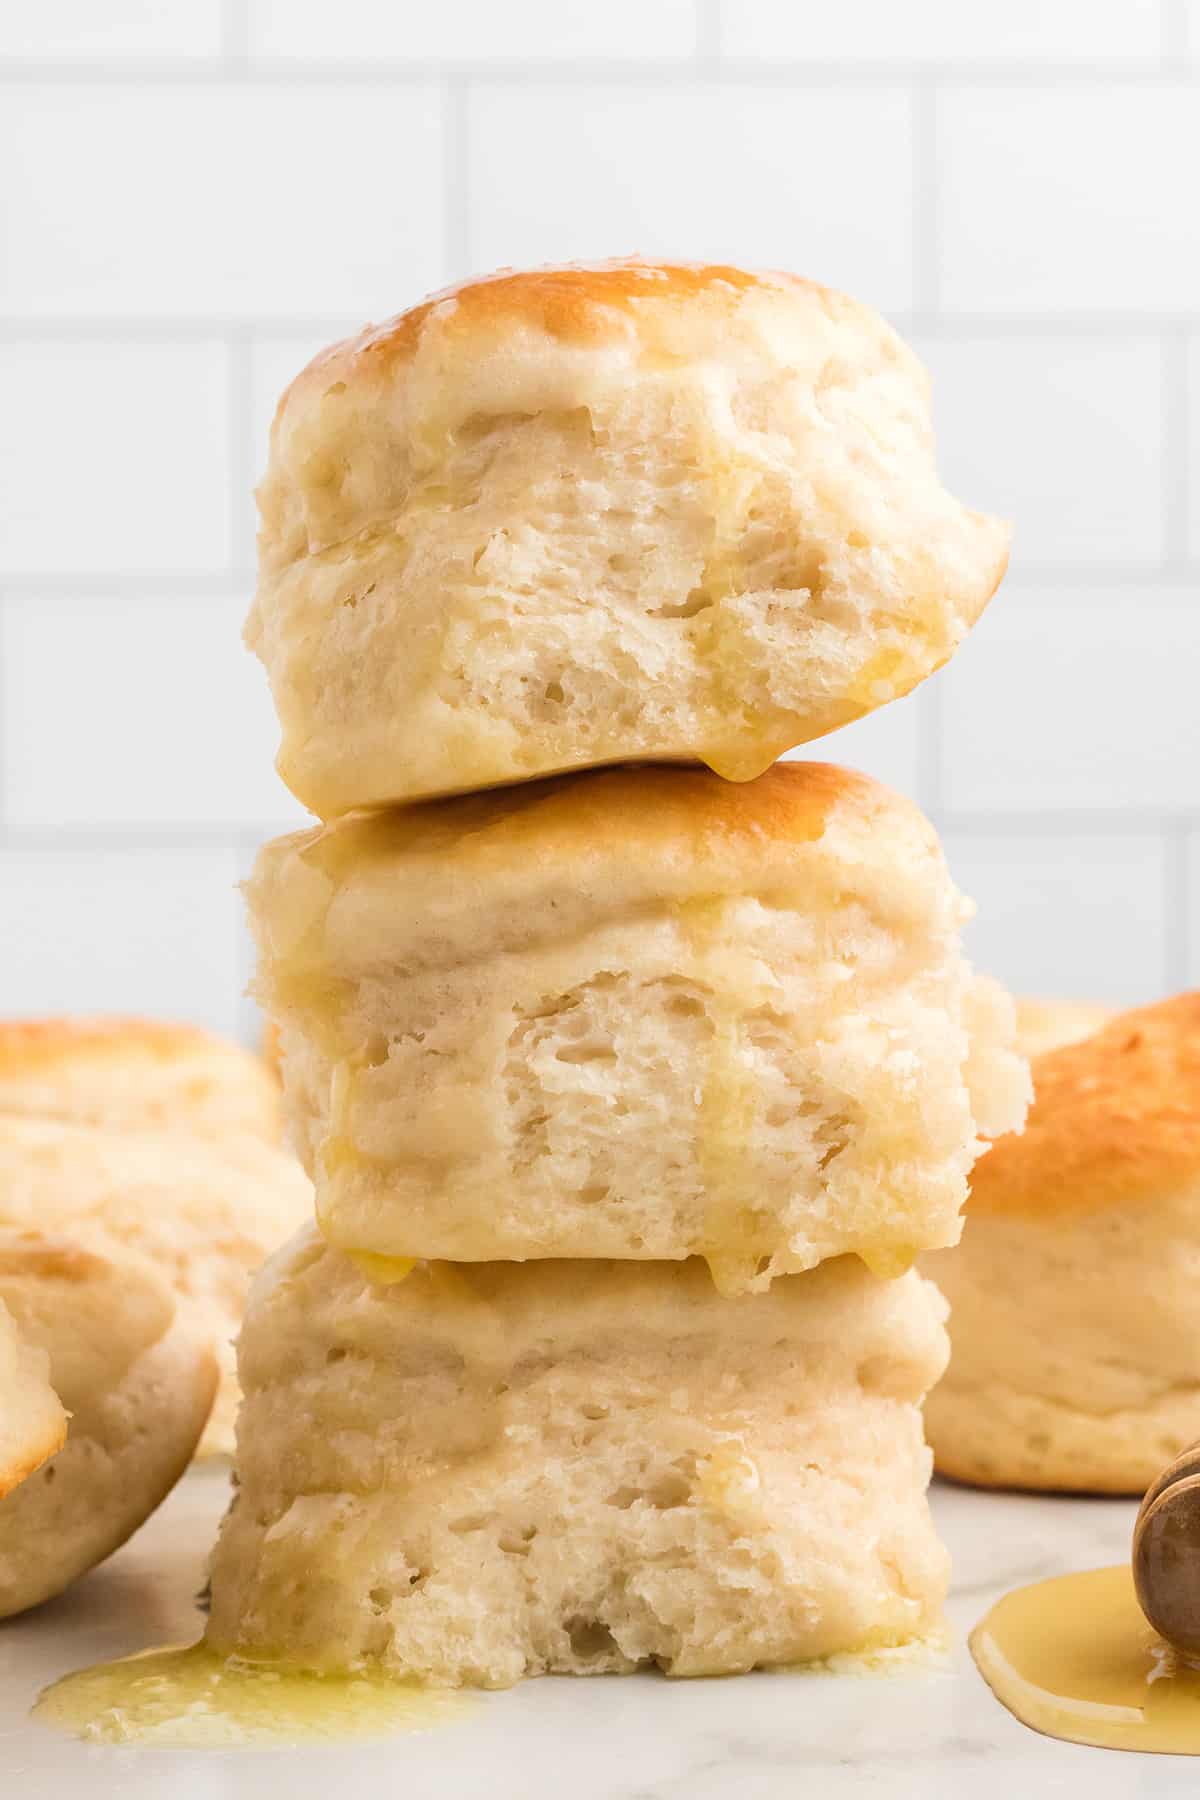 A stack of biscuits dripping with honey.